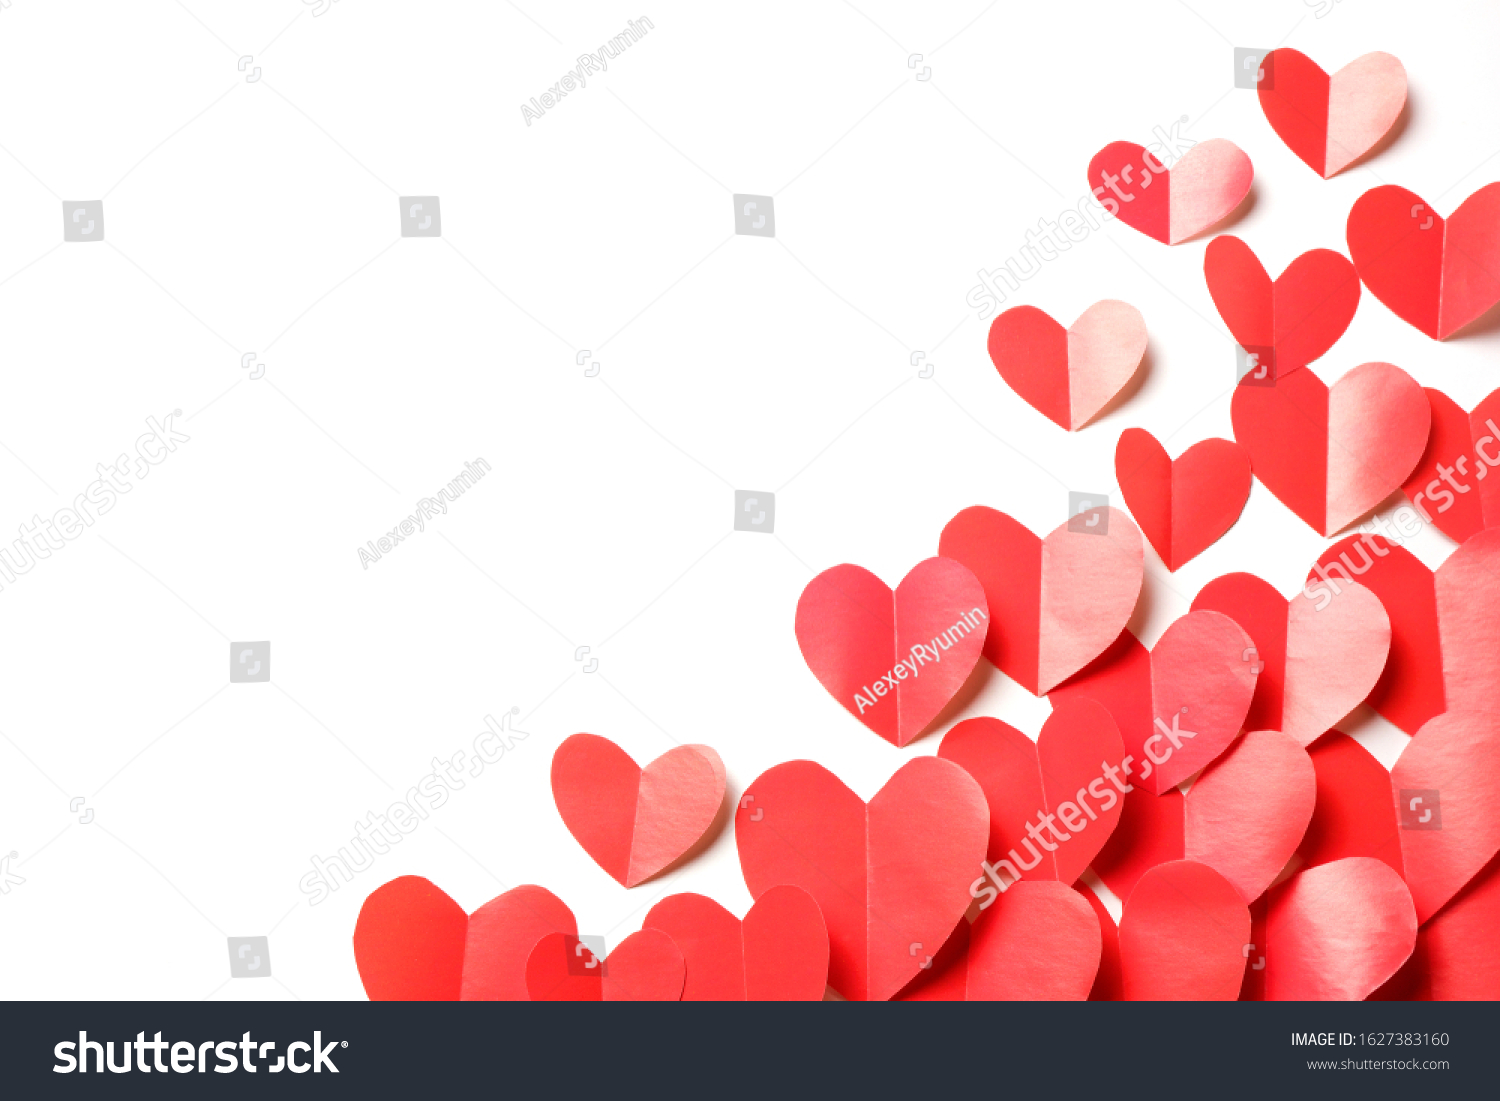 Cut out of red paper hearts on white background isolated. Cute Valentines day, Womans day, love, romantic, wedding composition with copy space for your text for banner, card, offer, flyer, advertising, invitation.